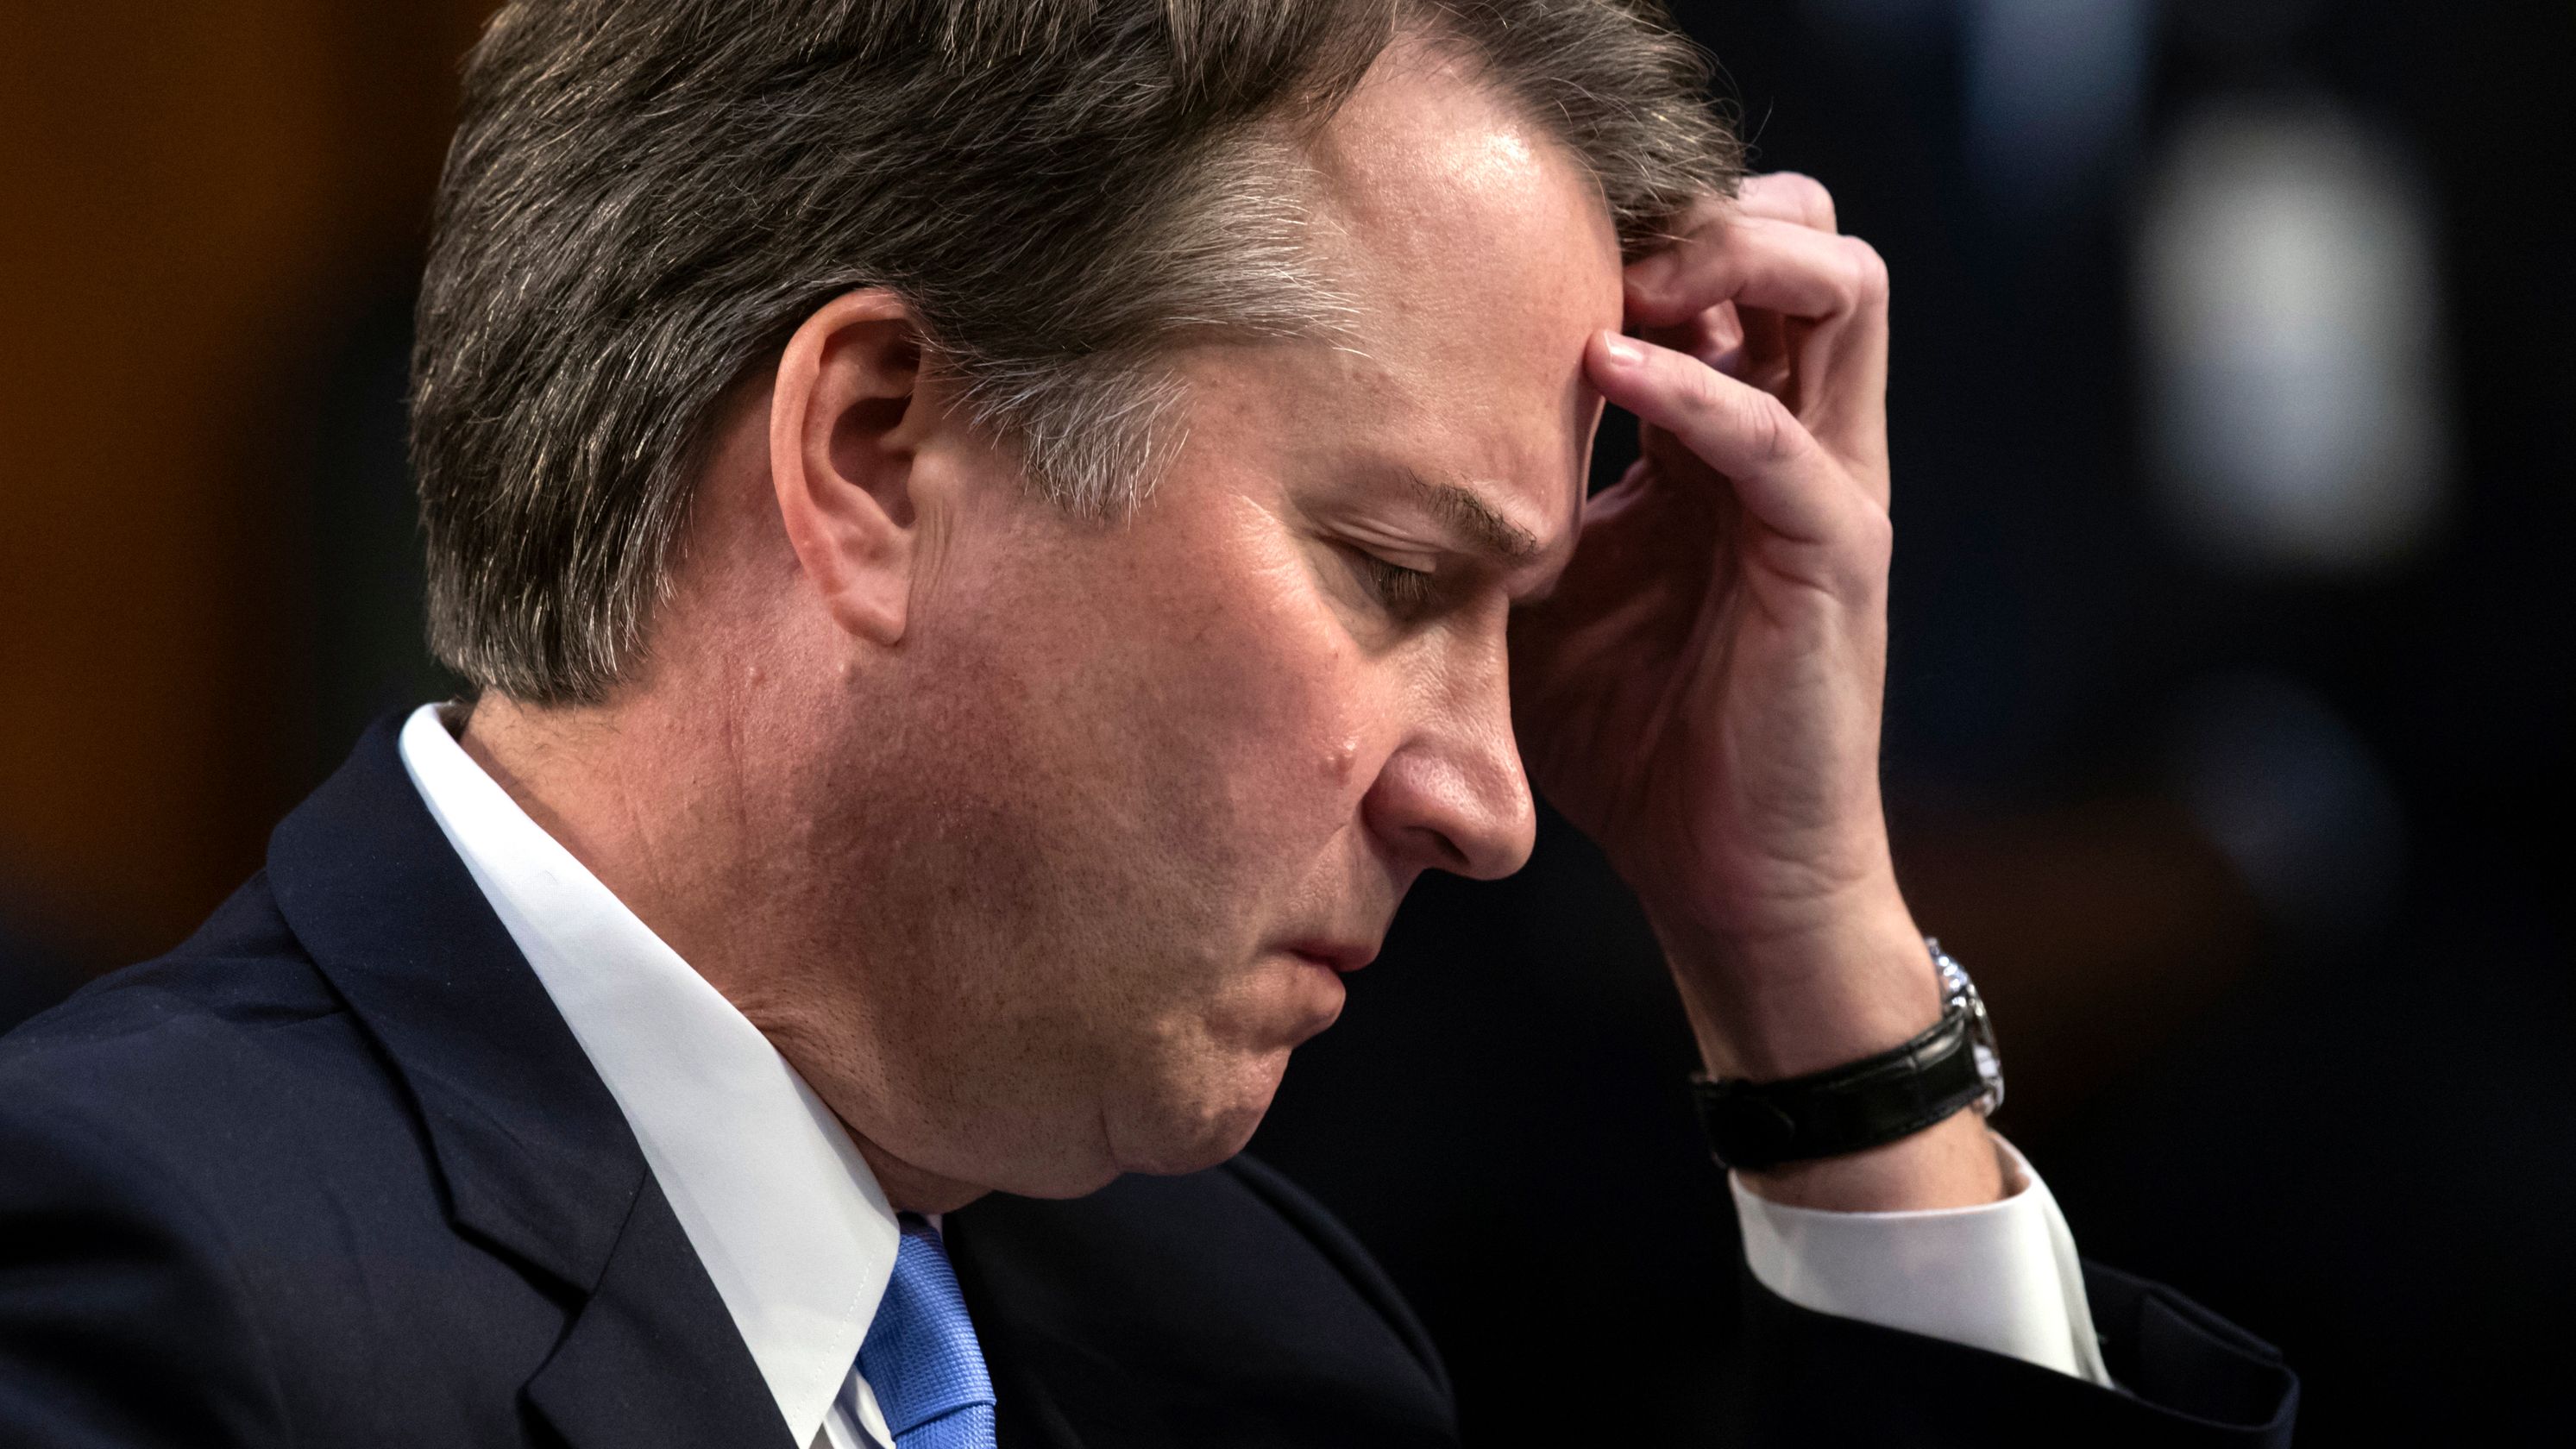 Was Kavanough Involved In A Plot To Pin His Assault Allegation On A Former Classmate?